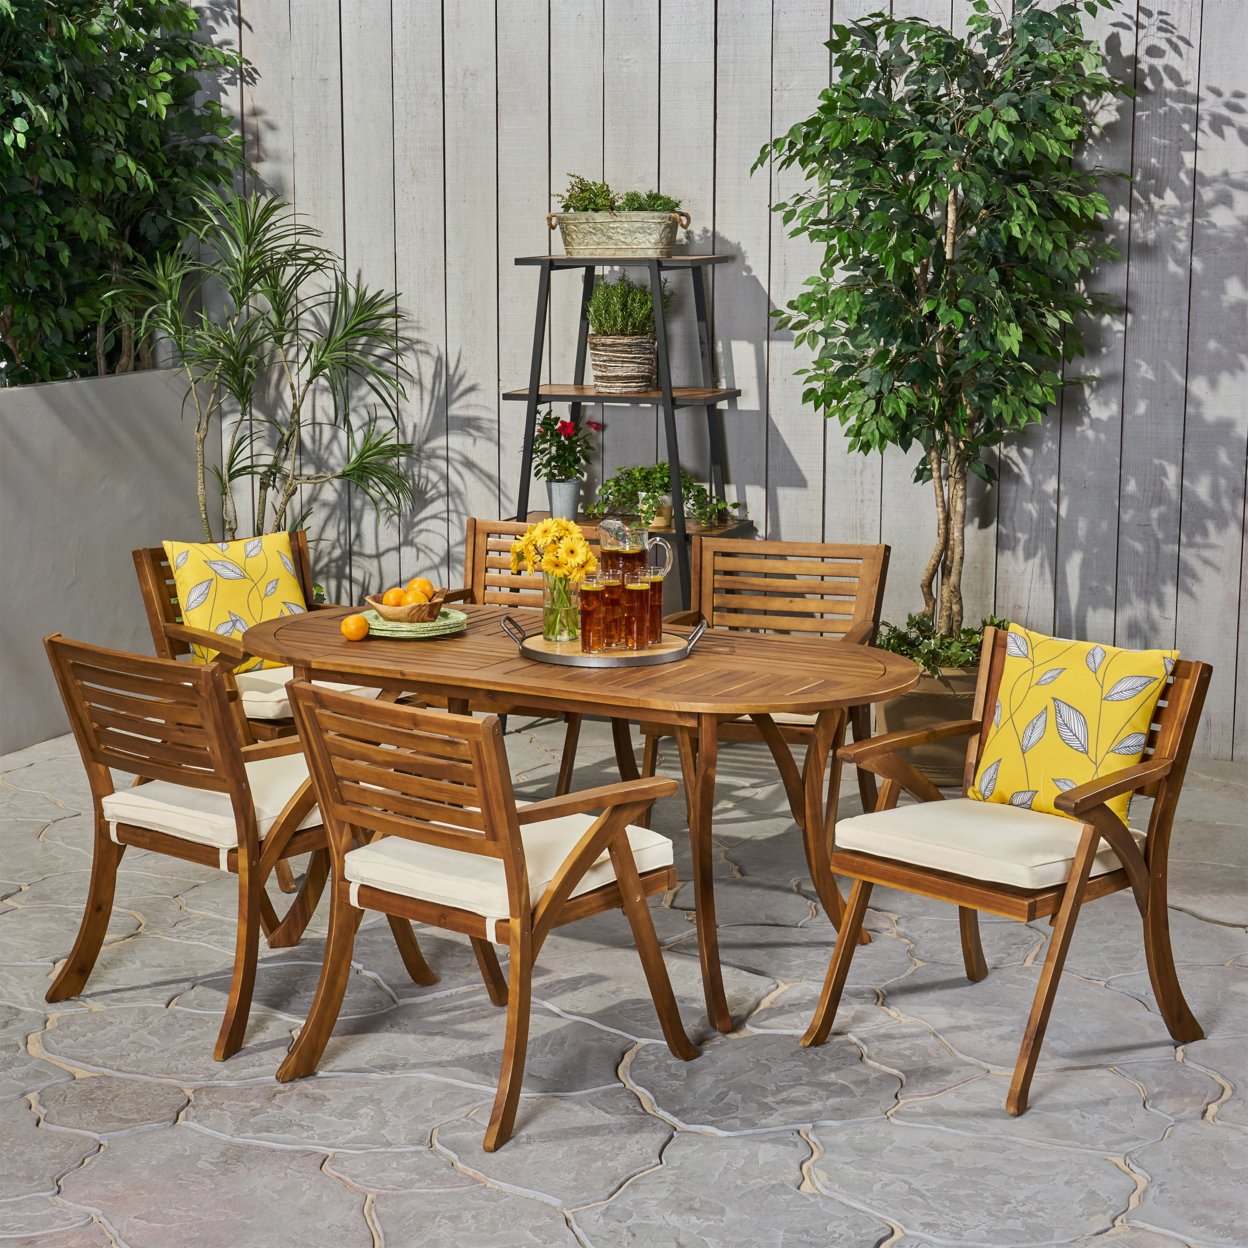 Stephanie Outdoor 6 Seater Acacia Wood Oval Dining Set With Cushions - Teak Finish + Cream